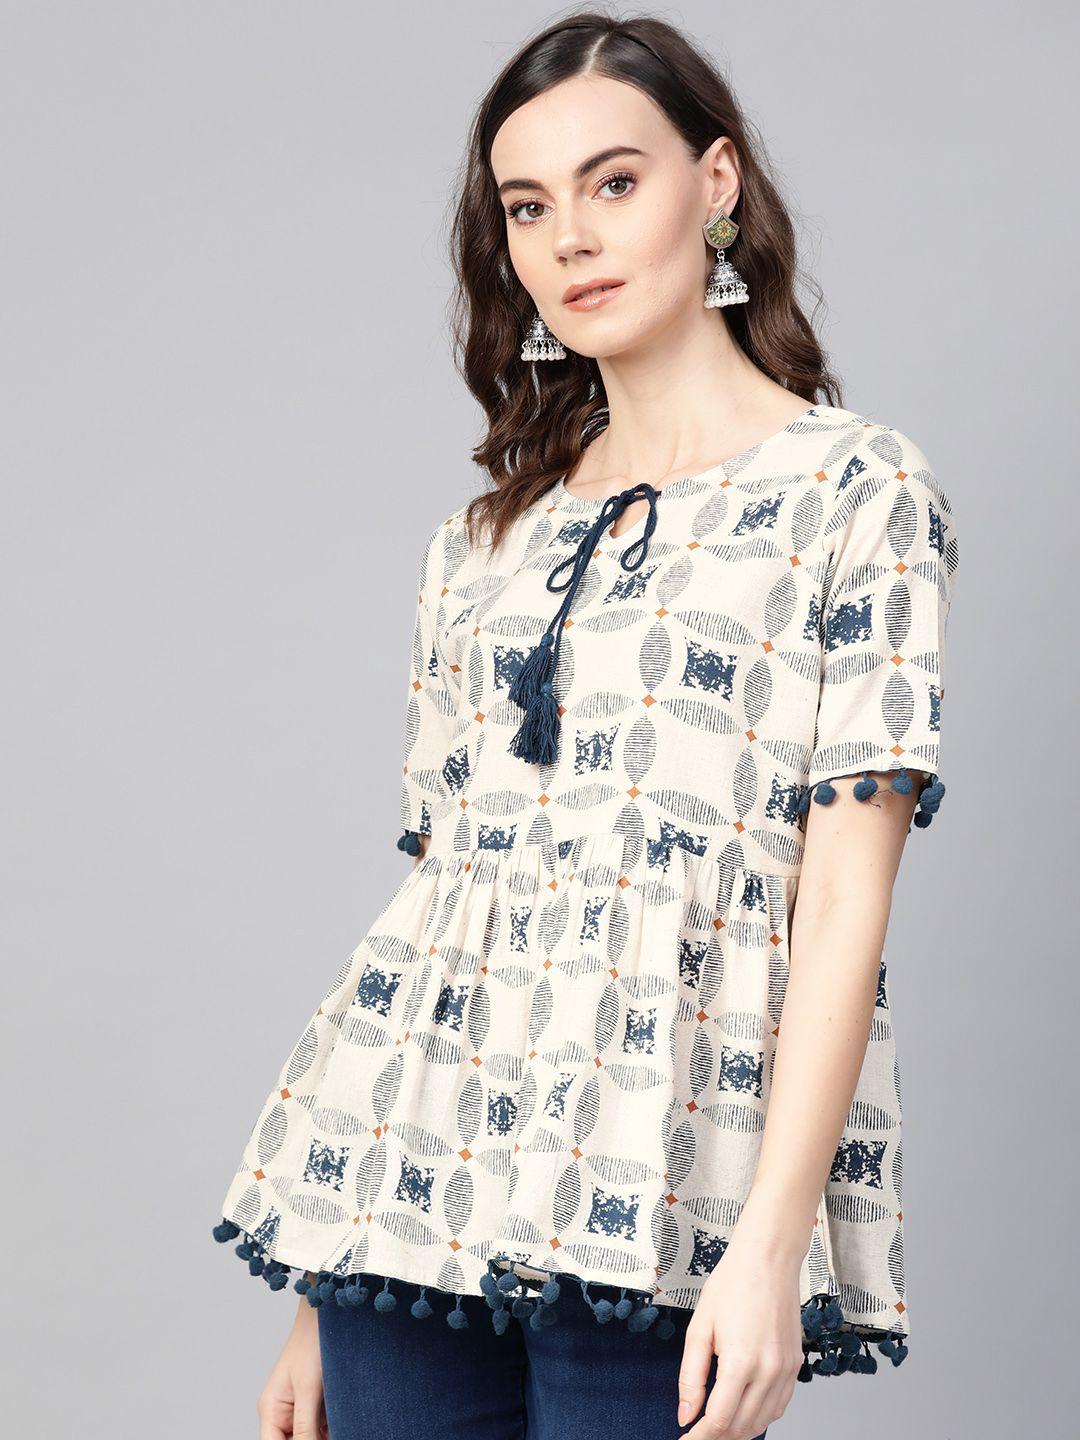 azira women off-white & navy printed a-line top